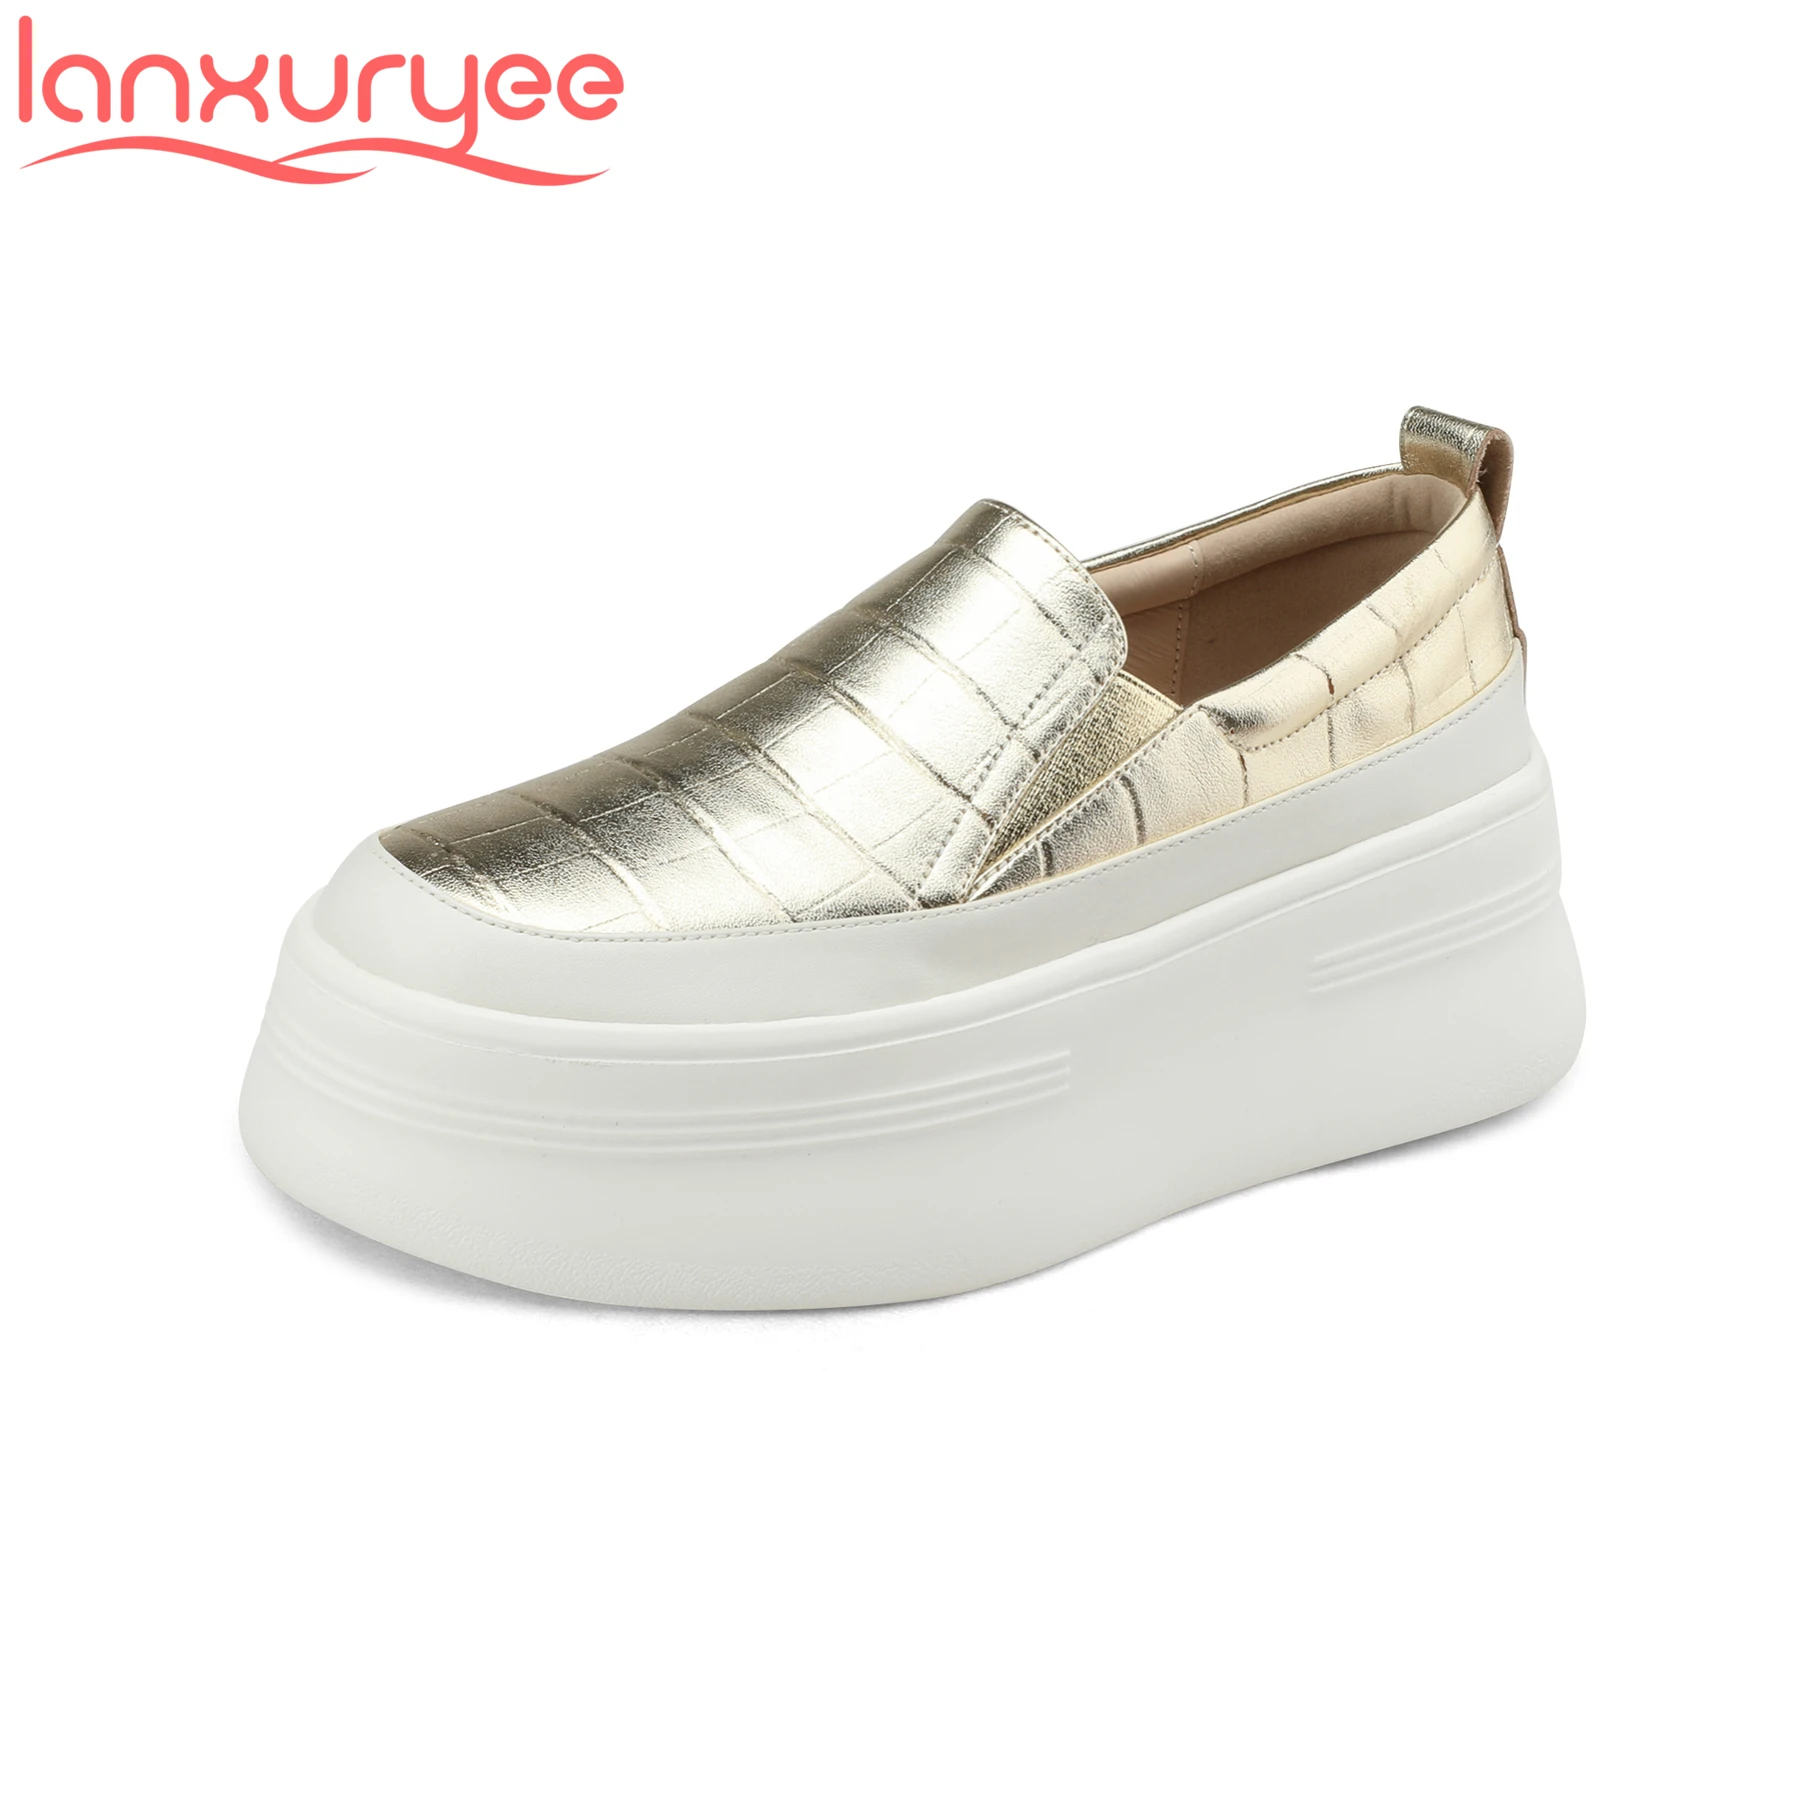 

Lanxuryee Cow Leather Thick Bottom Concise Slip On Round Toe Spring Casual Women Vulcanized Shoes Luxury Vacation Dress Sneakers